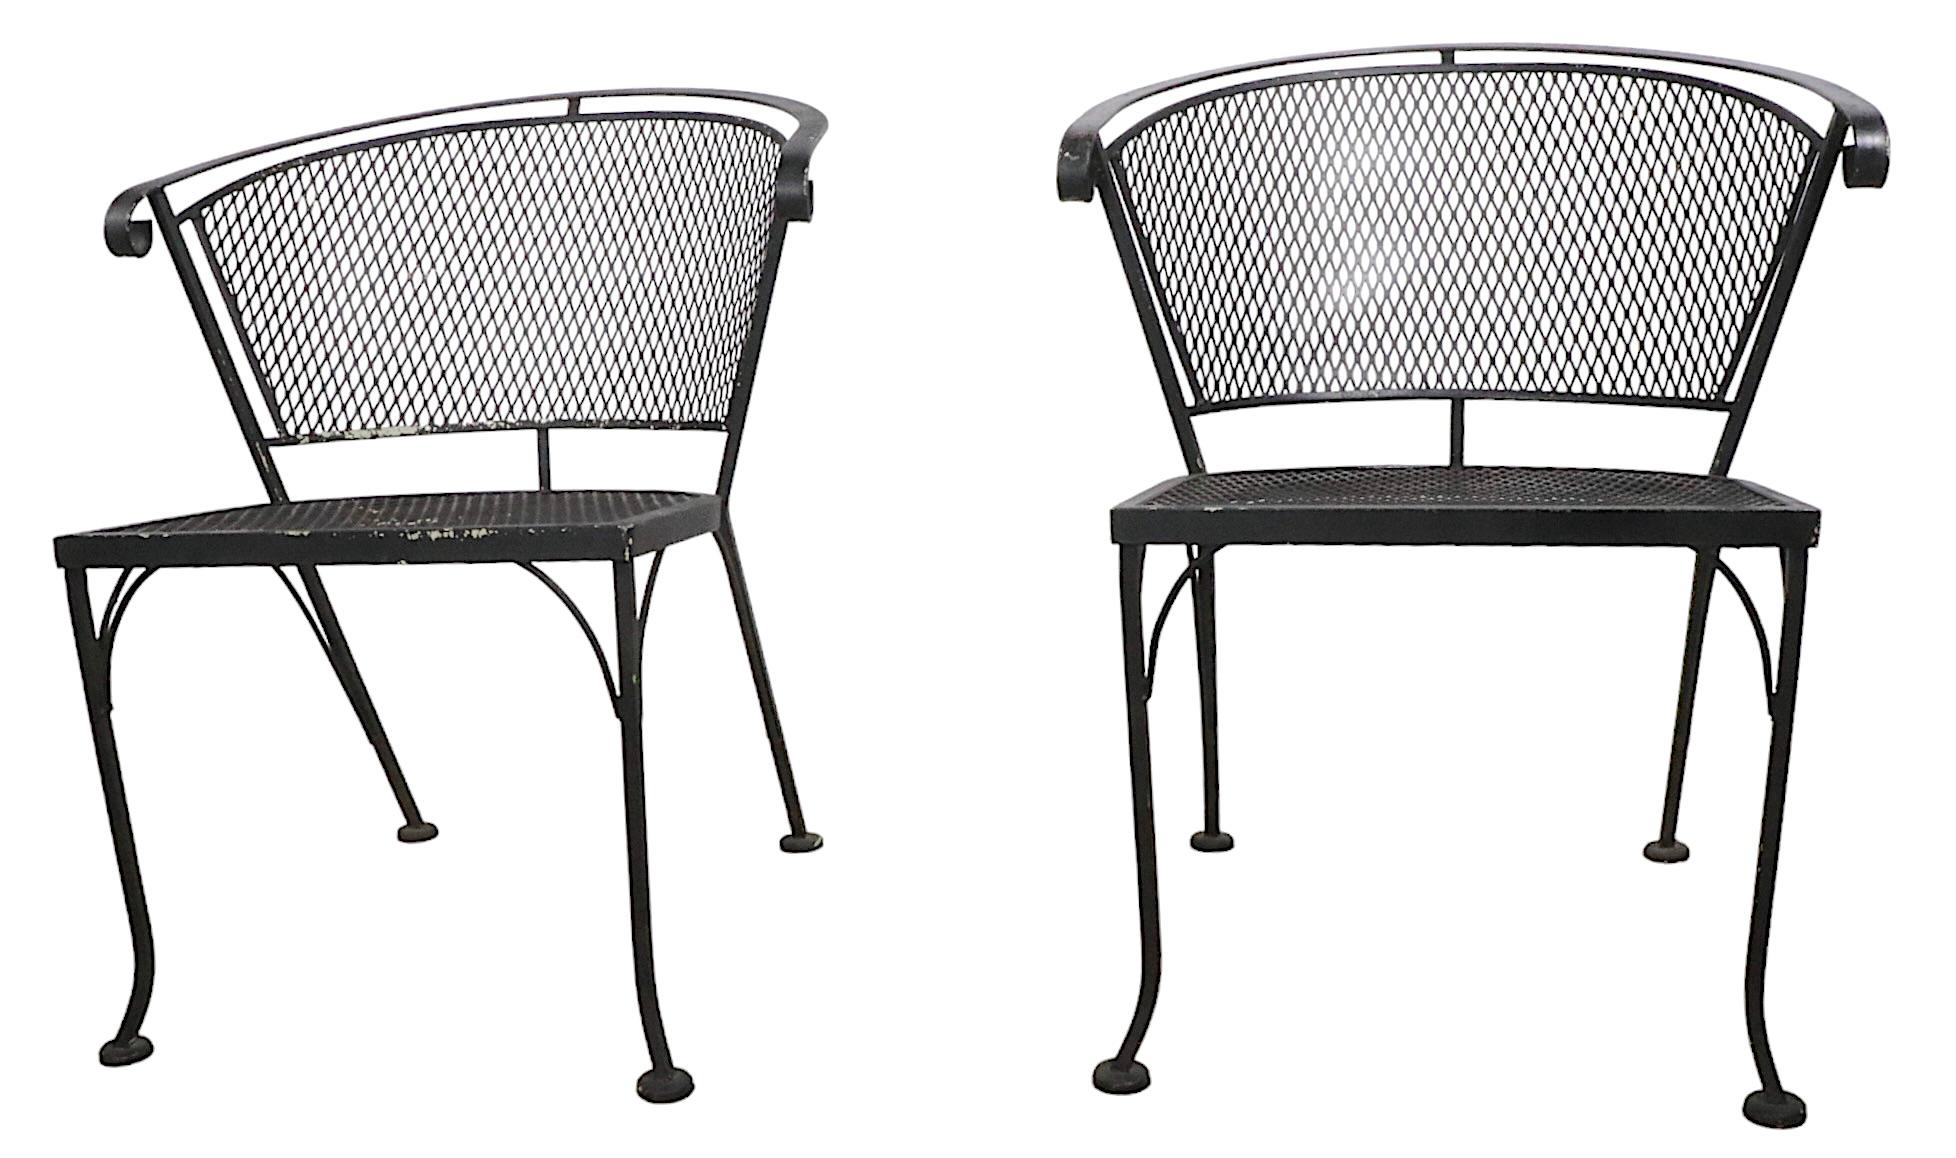 Pr Vintage  Woodard Garden Patio Poolside Chairs in Wrought Iron and Metal Mesh  2